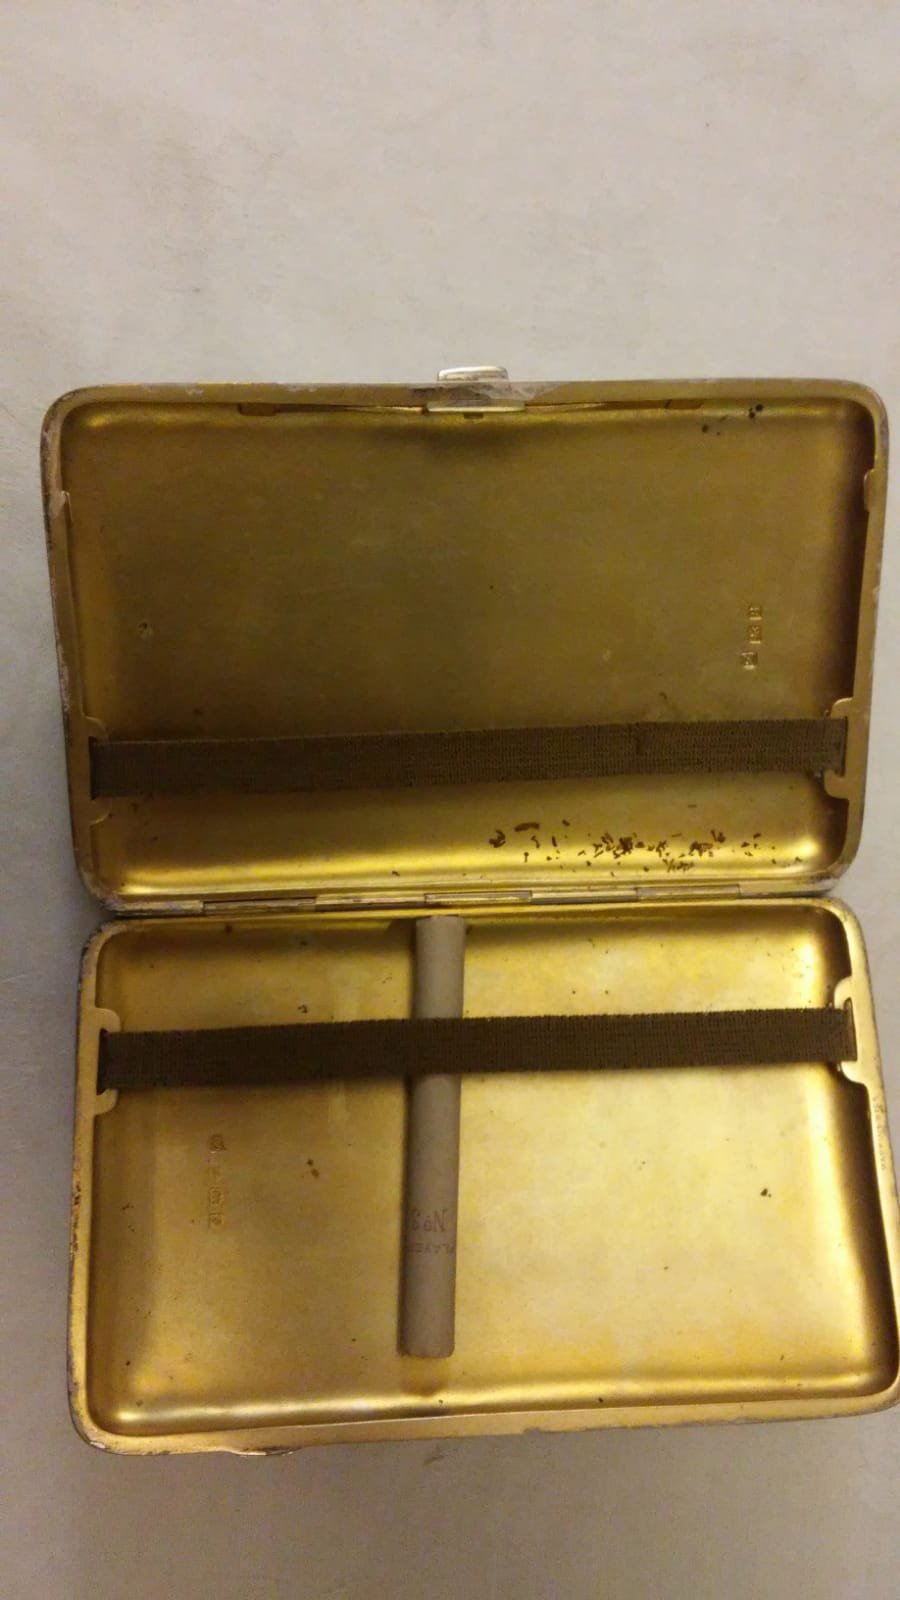 A 'token of esteem' gift of a silver cigarette case and two pipes presented to Serjeant (Bill) Norman Clarke Adams, 670 from the Australian members of No. 4 Troop in May 1918.